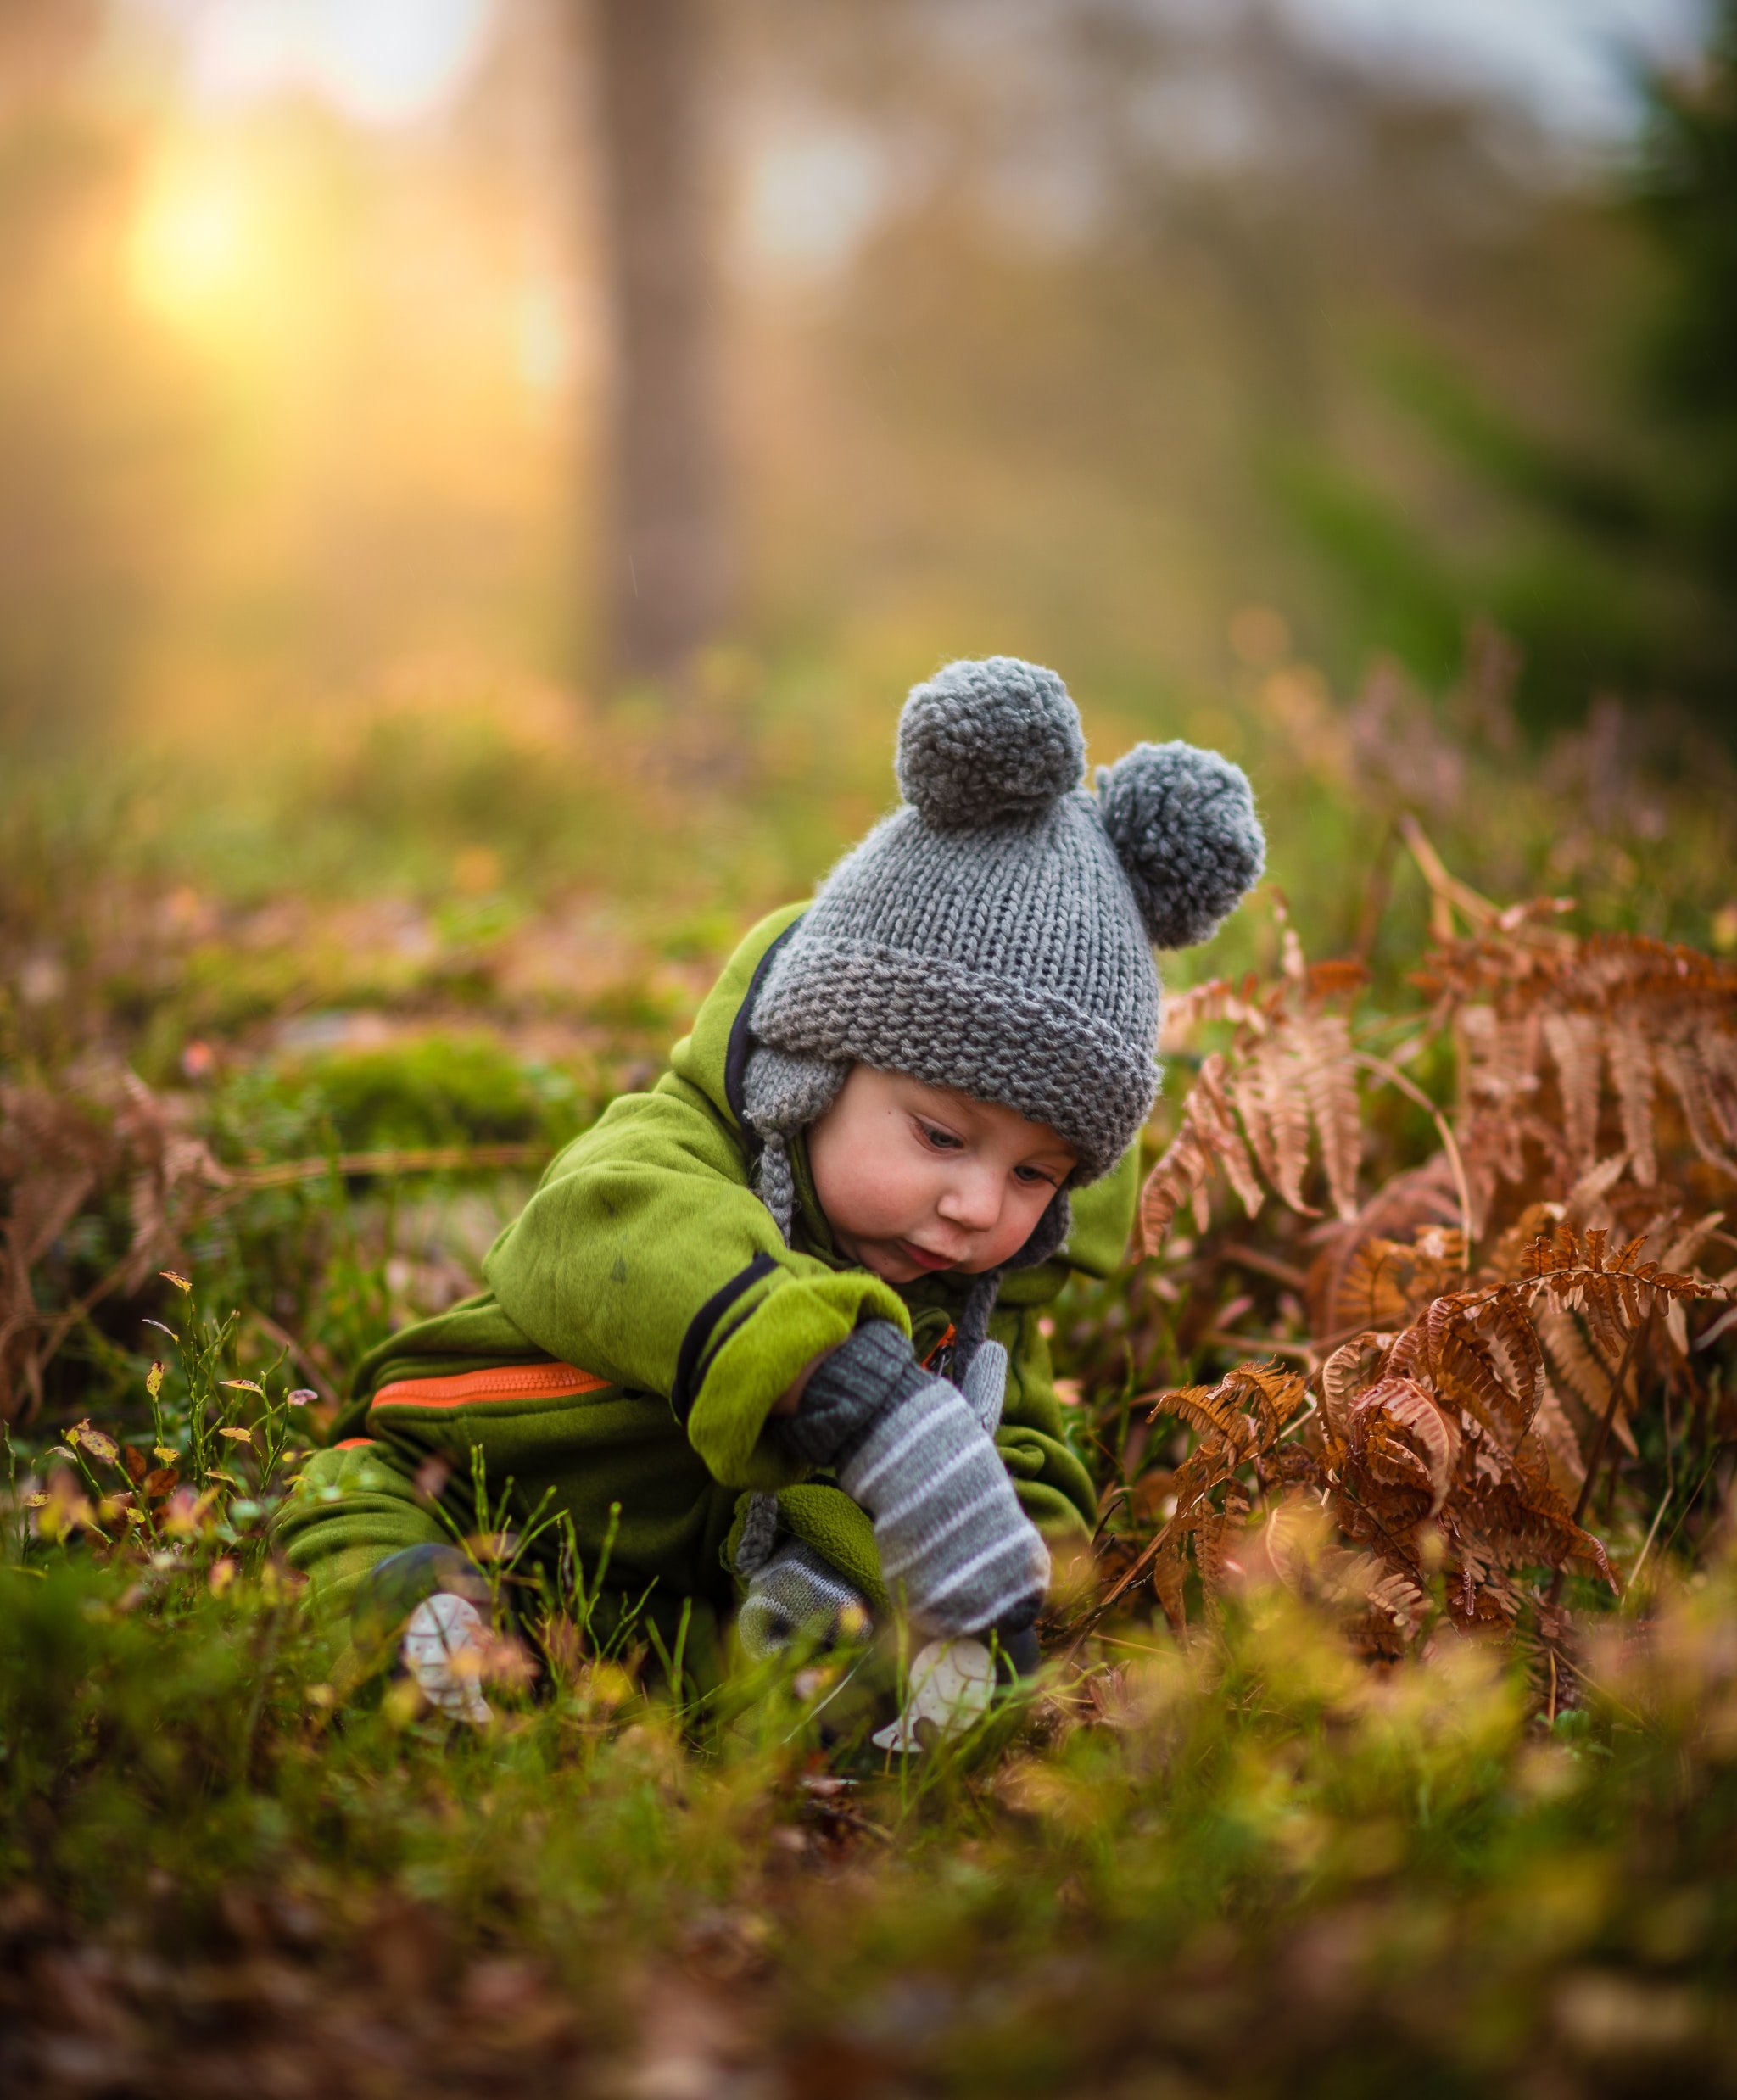 A child in the wild. Nature can help to teach kids about sustainability